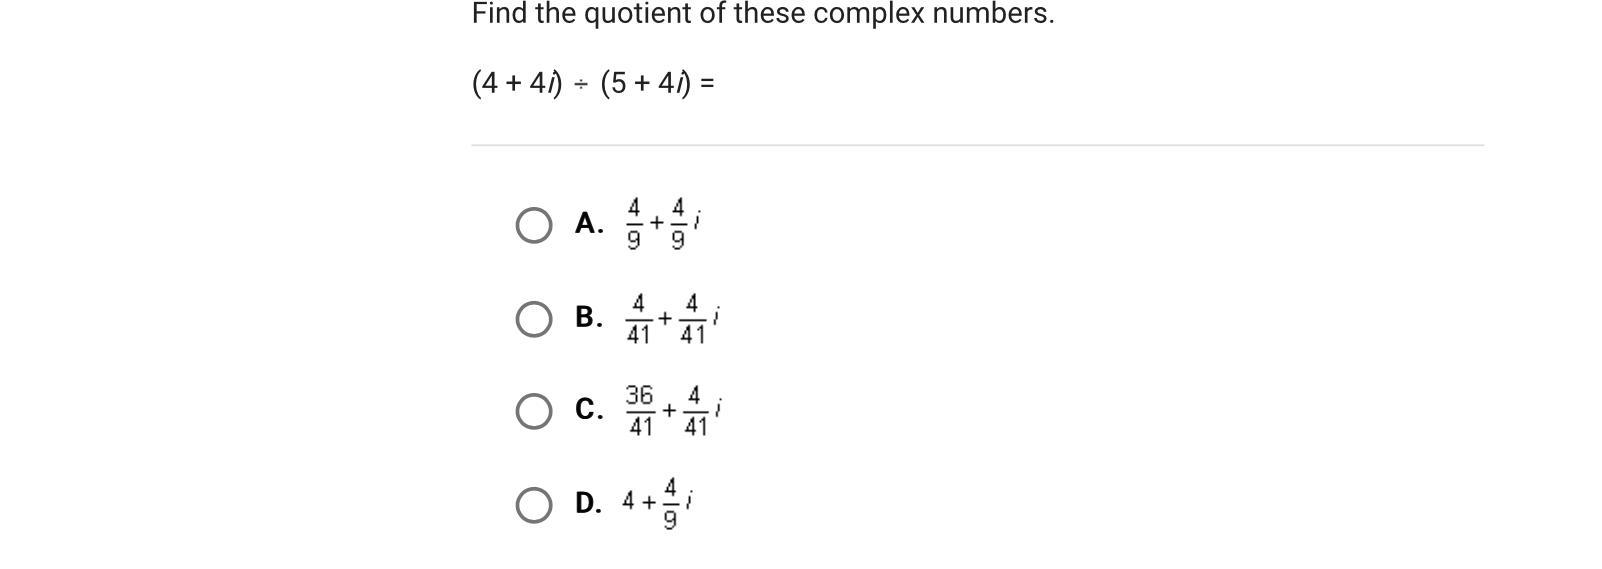 Find The Product Of These Complex Numbers.(8 + 6i)(-5 + 7i) =A.-82 - 86iB.-82 + 26iC.2 + 26iD.2 - 86i